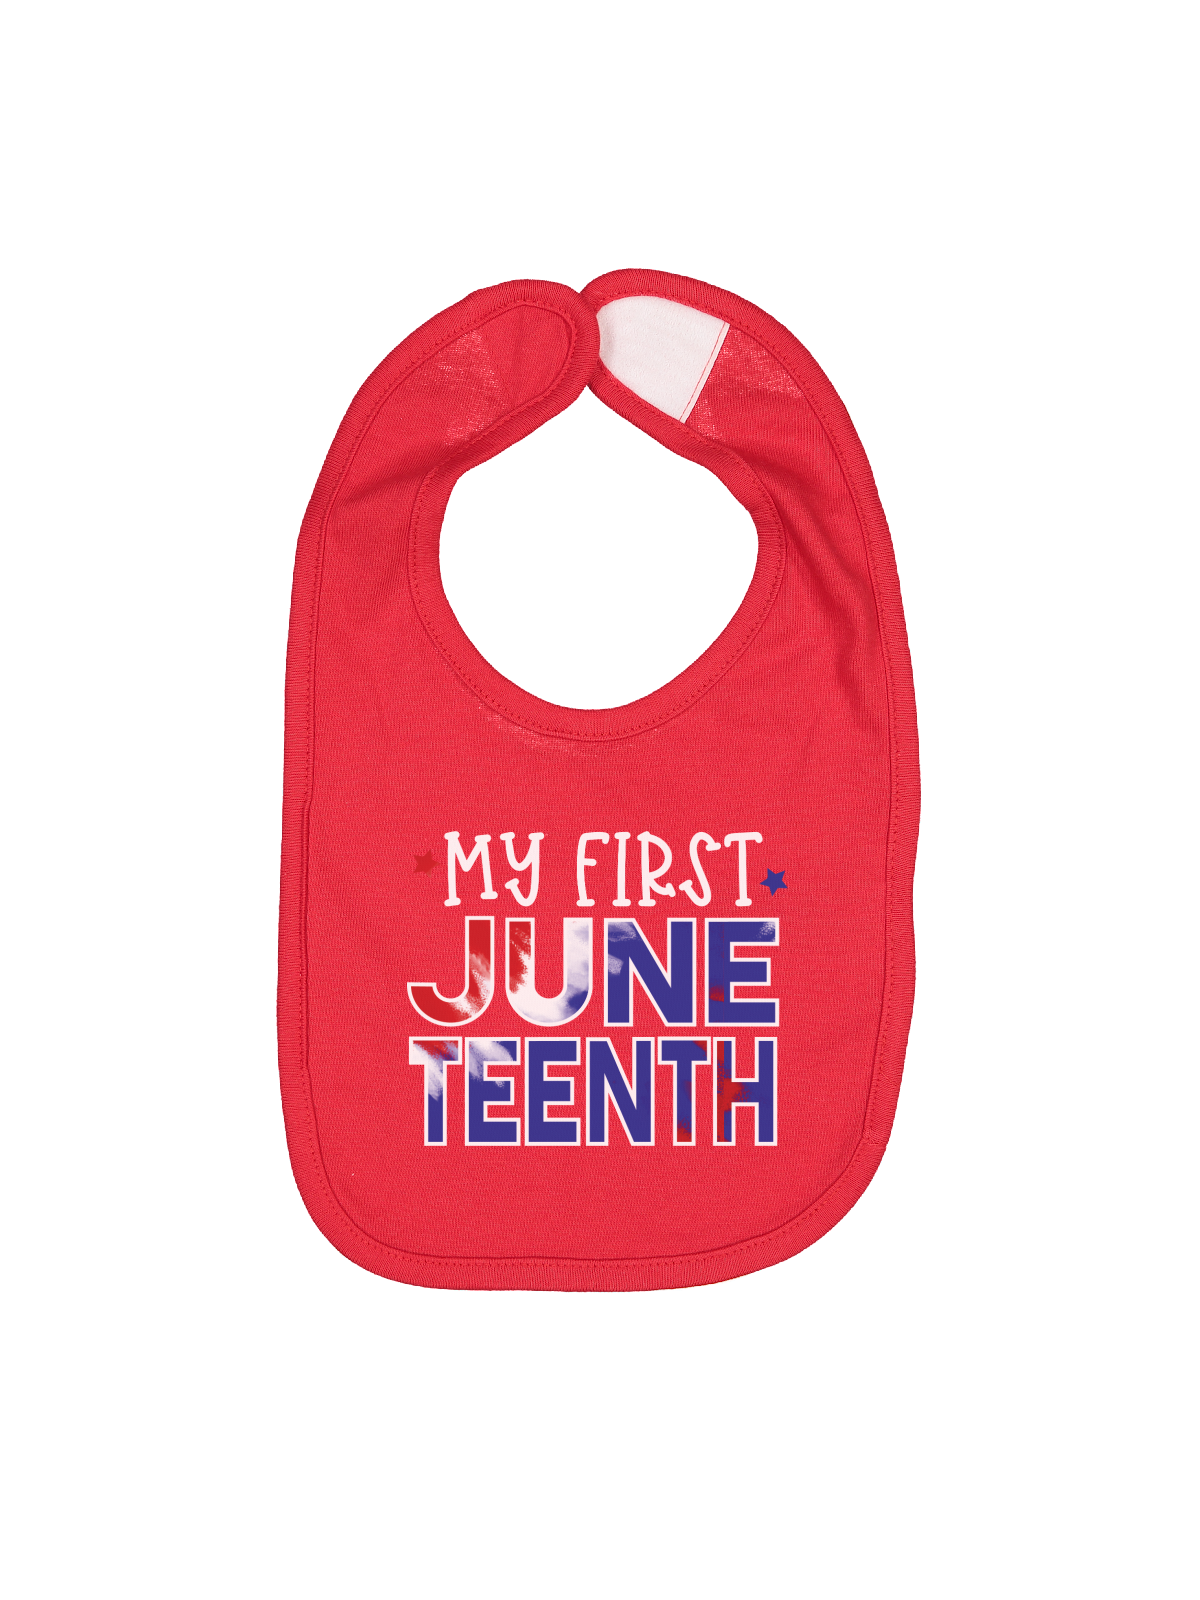 My First Juneteenth Infant Bib in Royal Blue